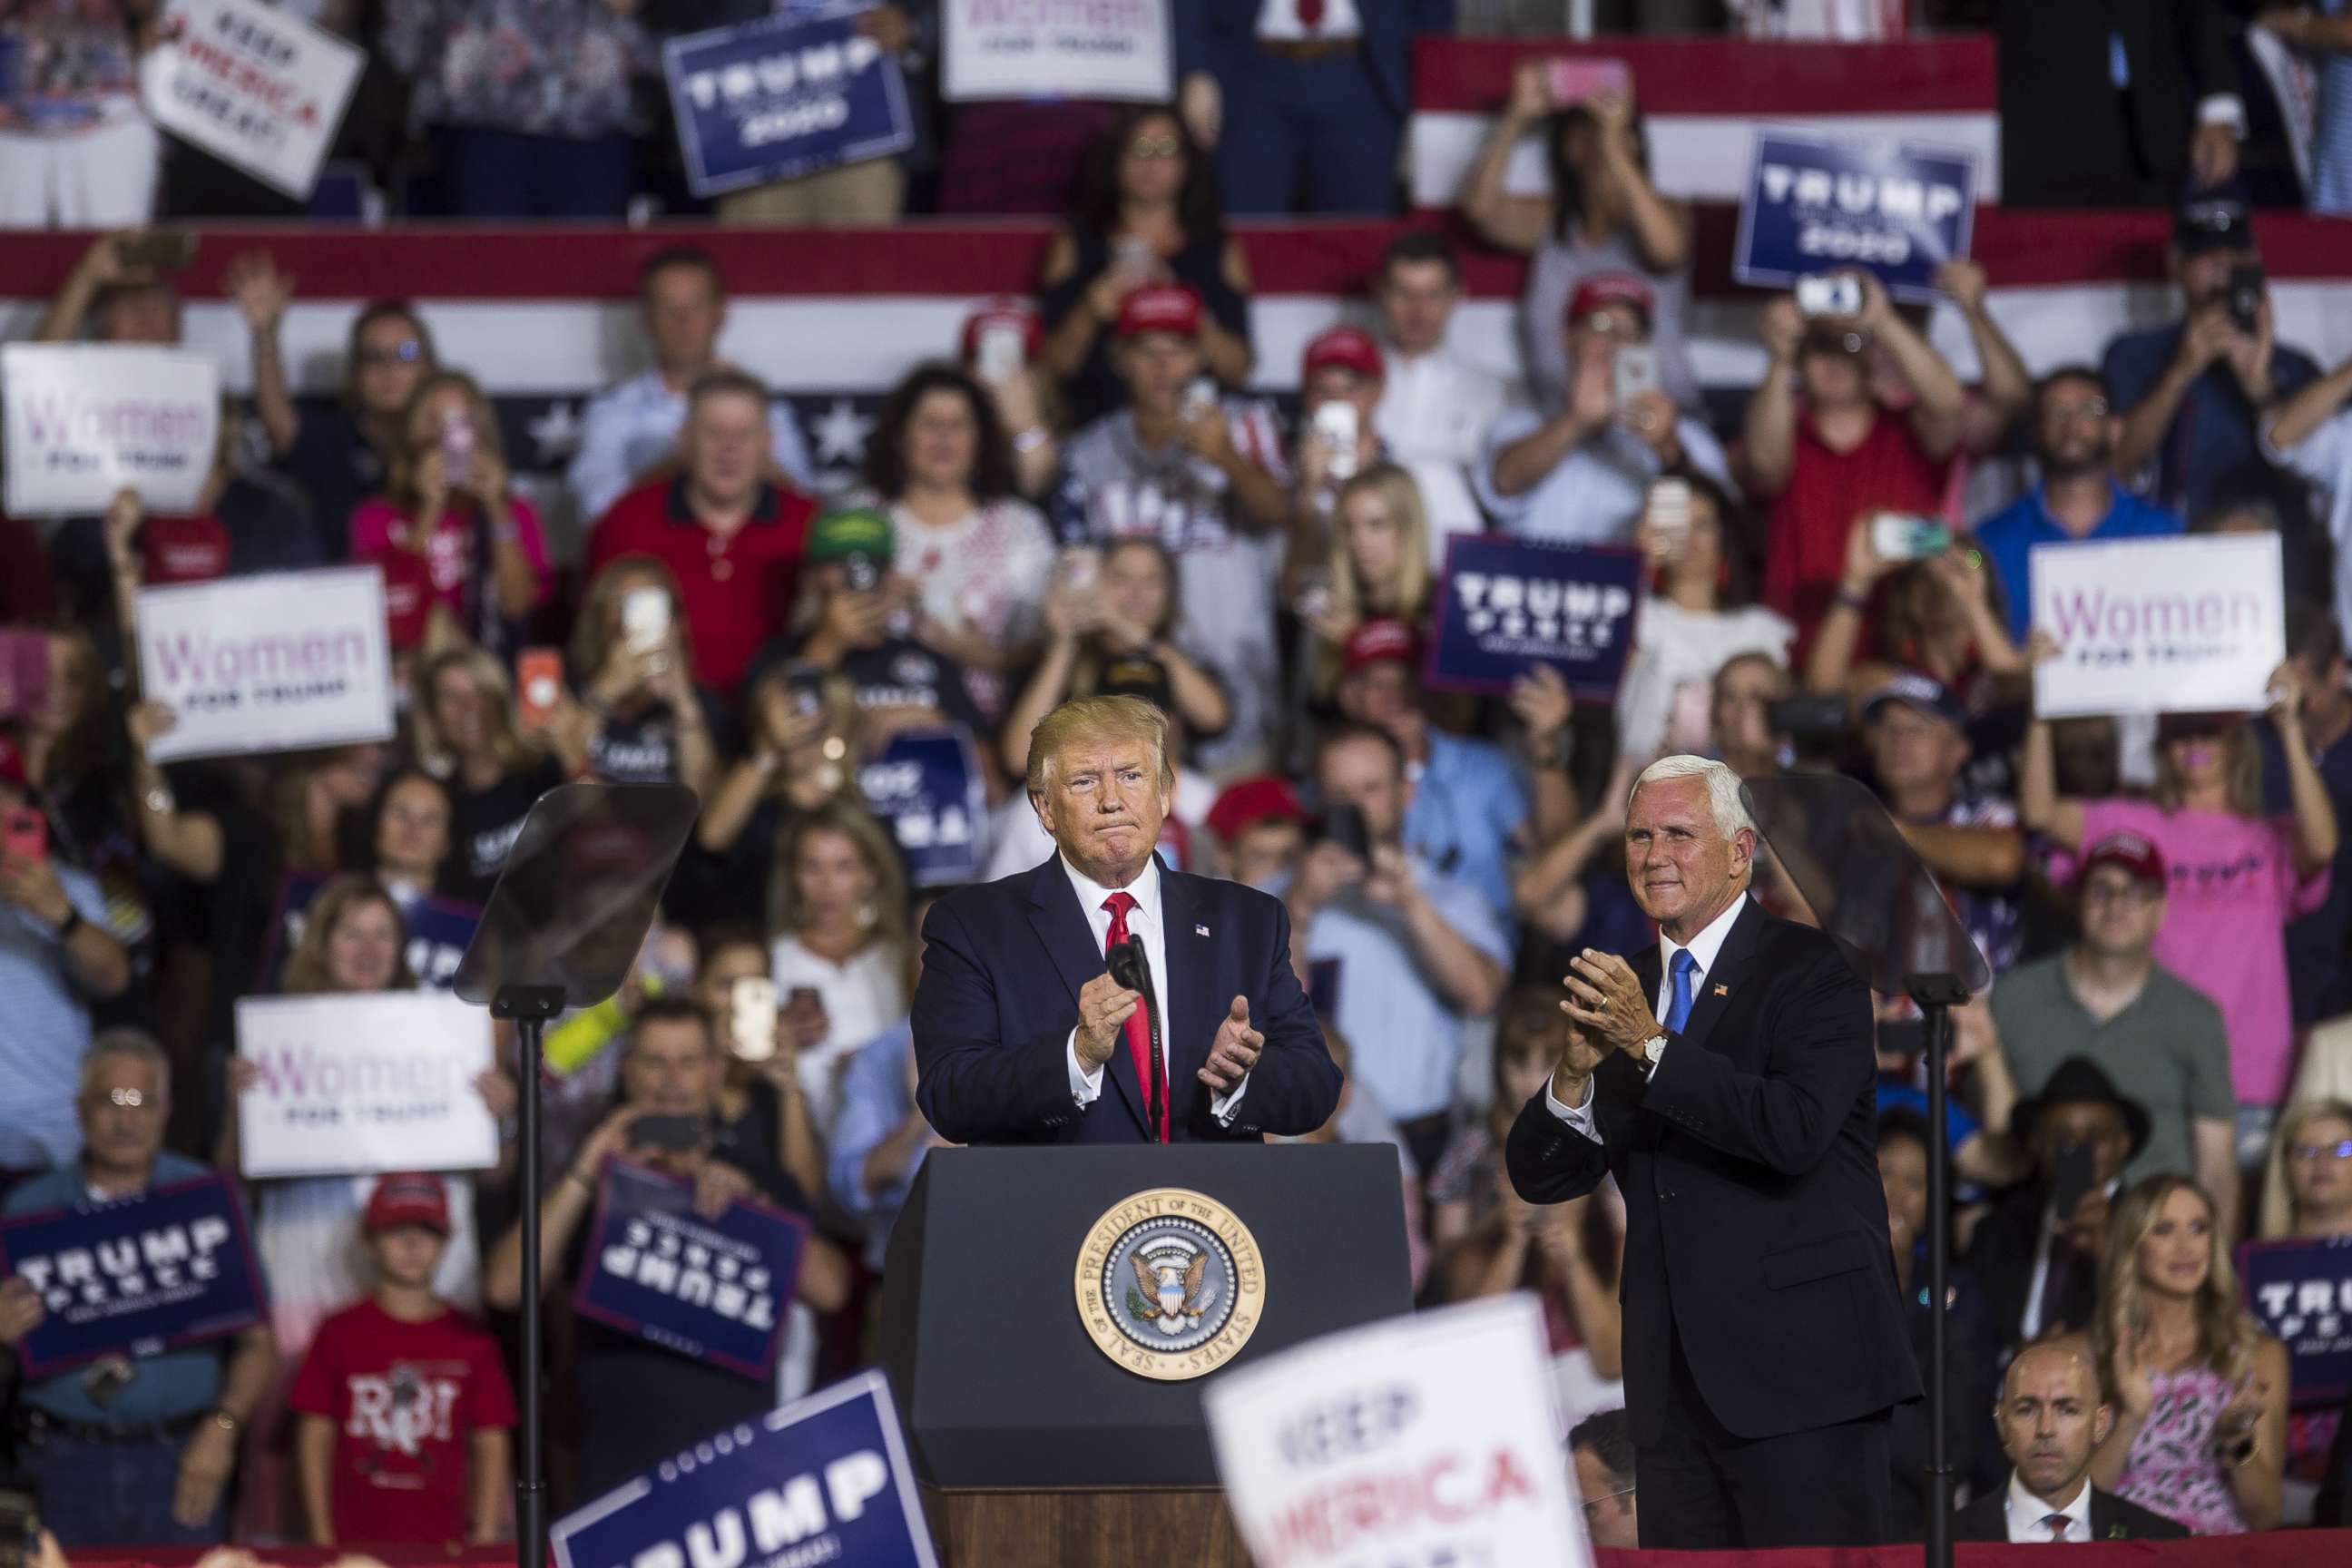 PHOTO: President Donald Trump takes the podium before speaking during a Keep America Great rally, July 17, 2019, in Greenville, North Carolina.